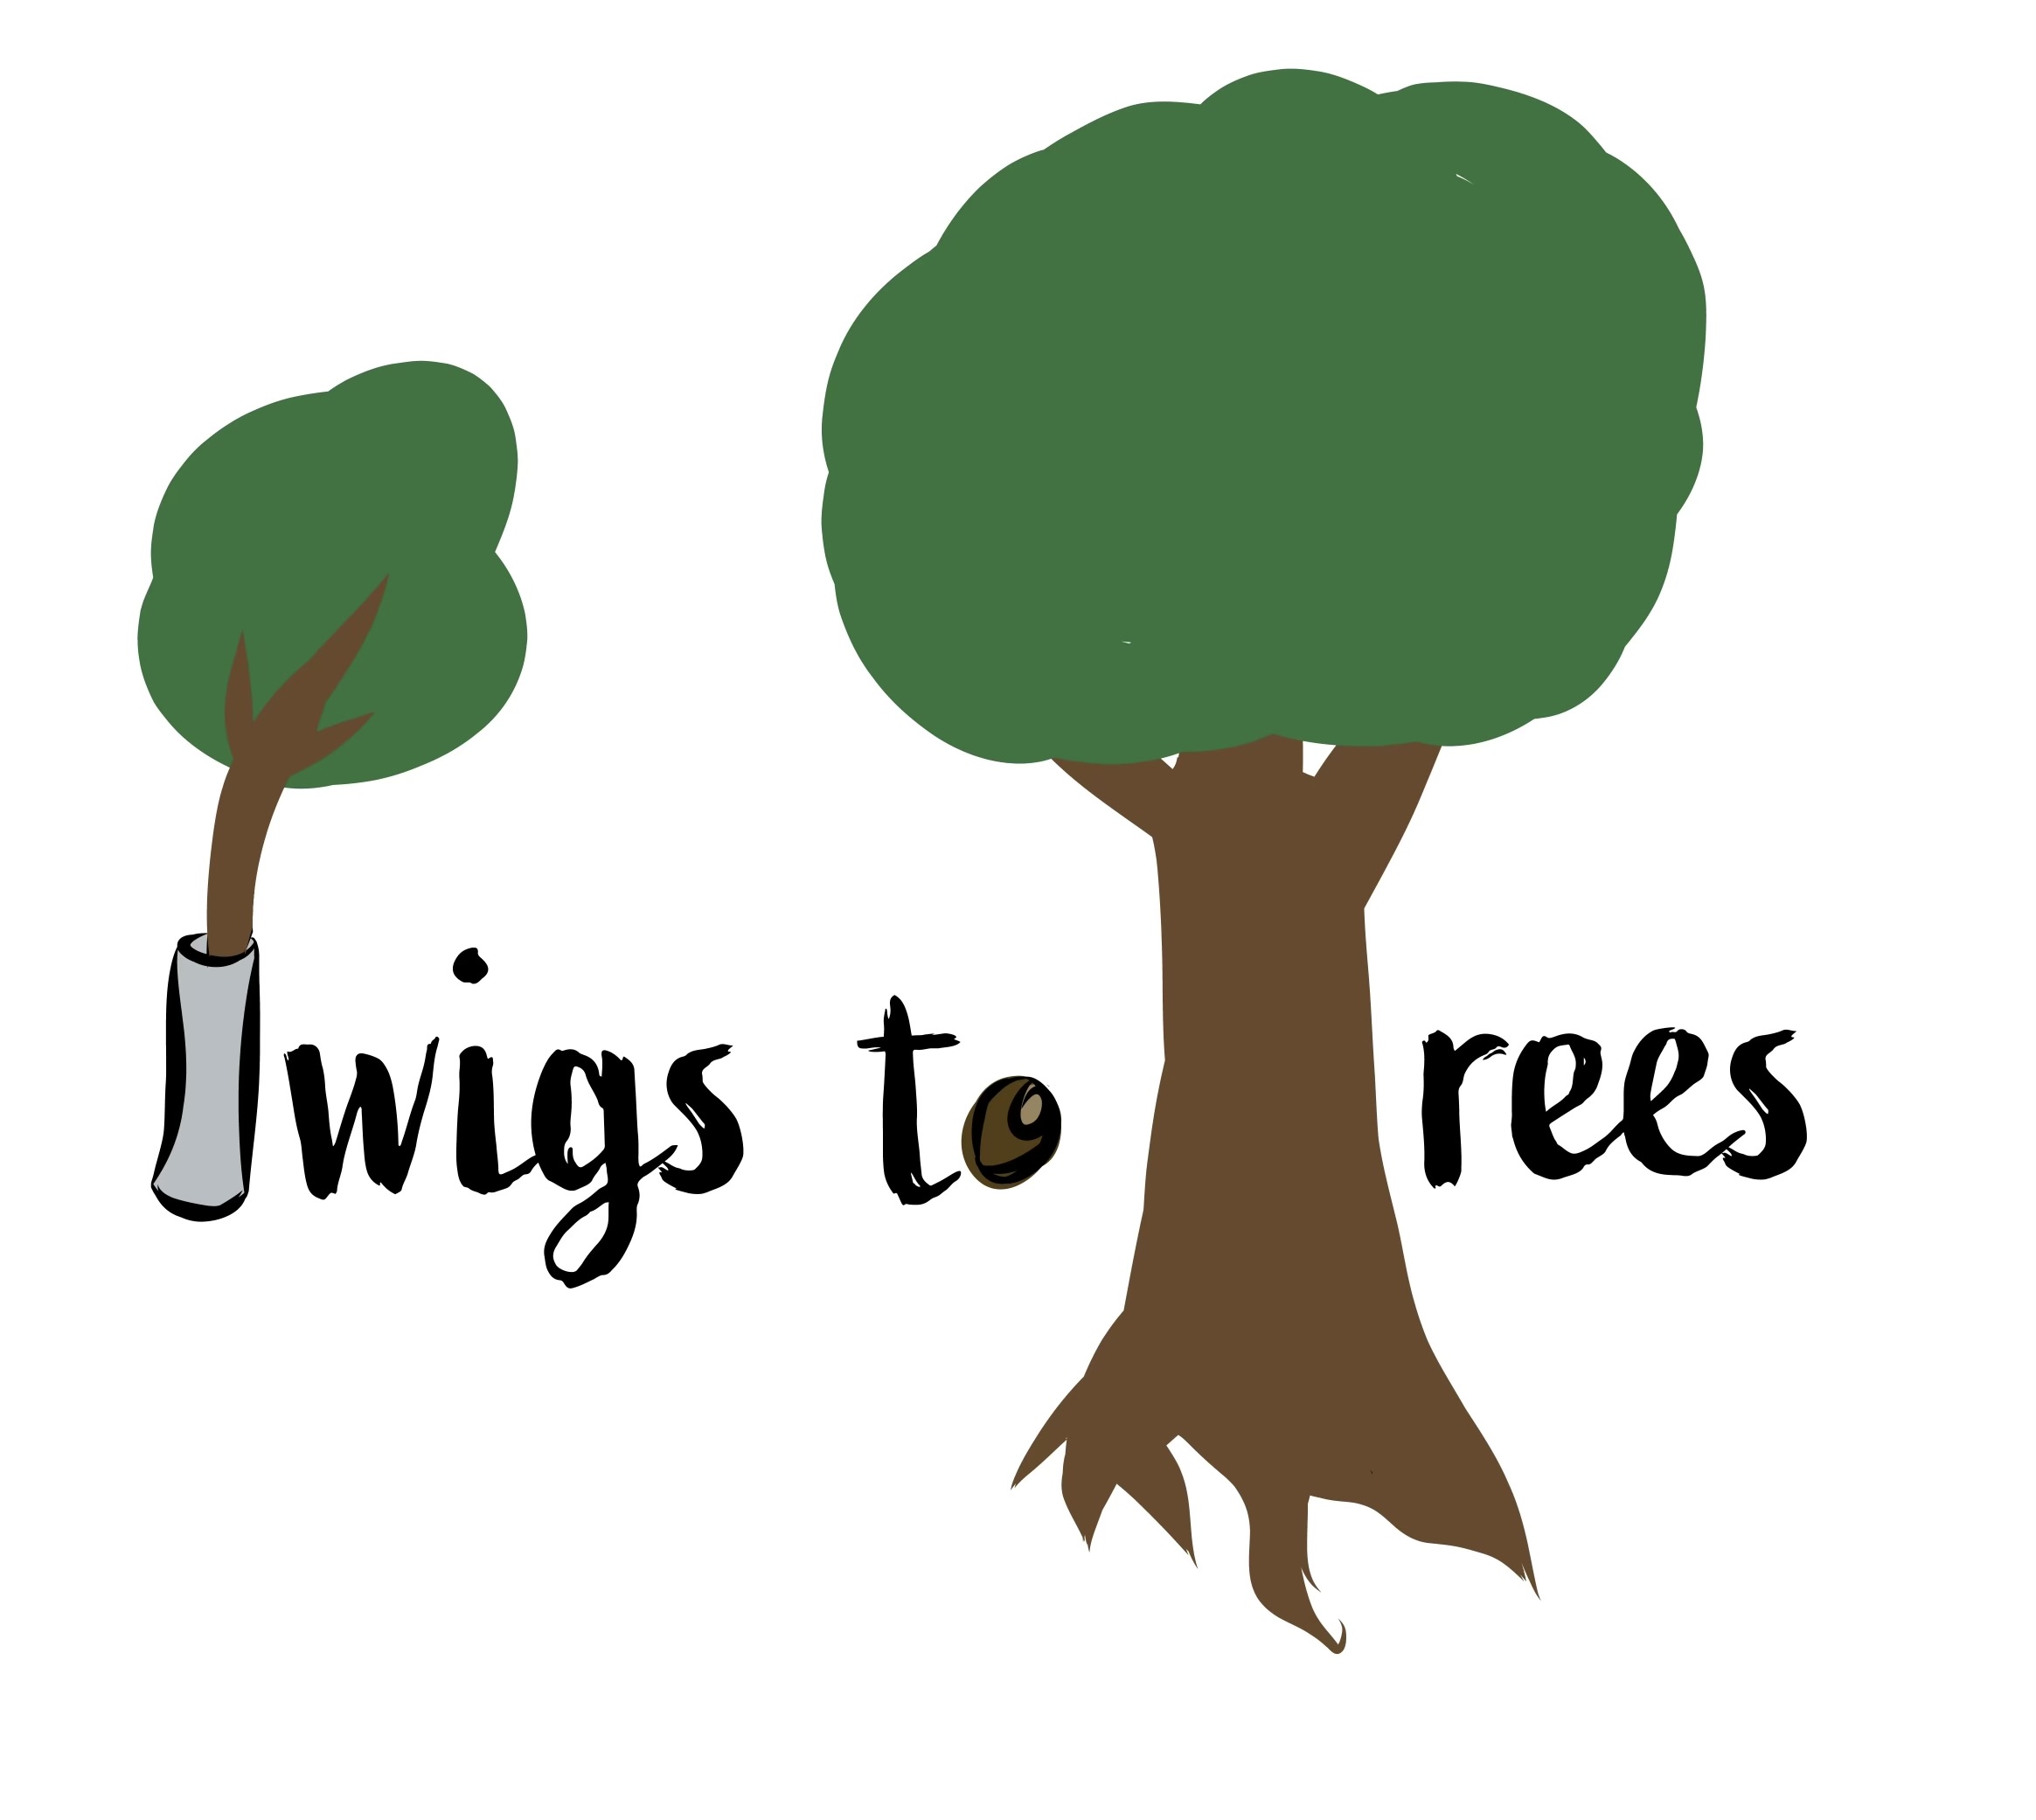 plant a tree | Tree drawing, Earth day posters, Save earth posters